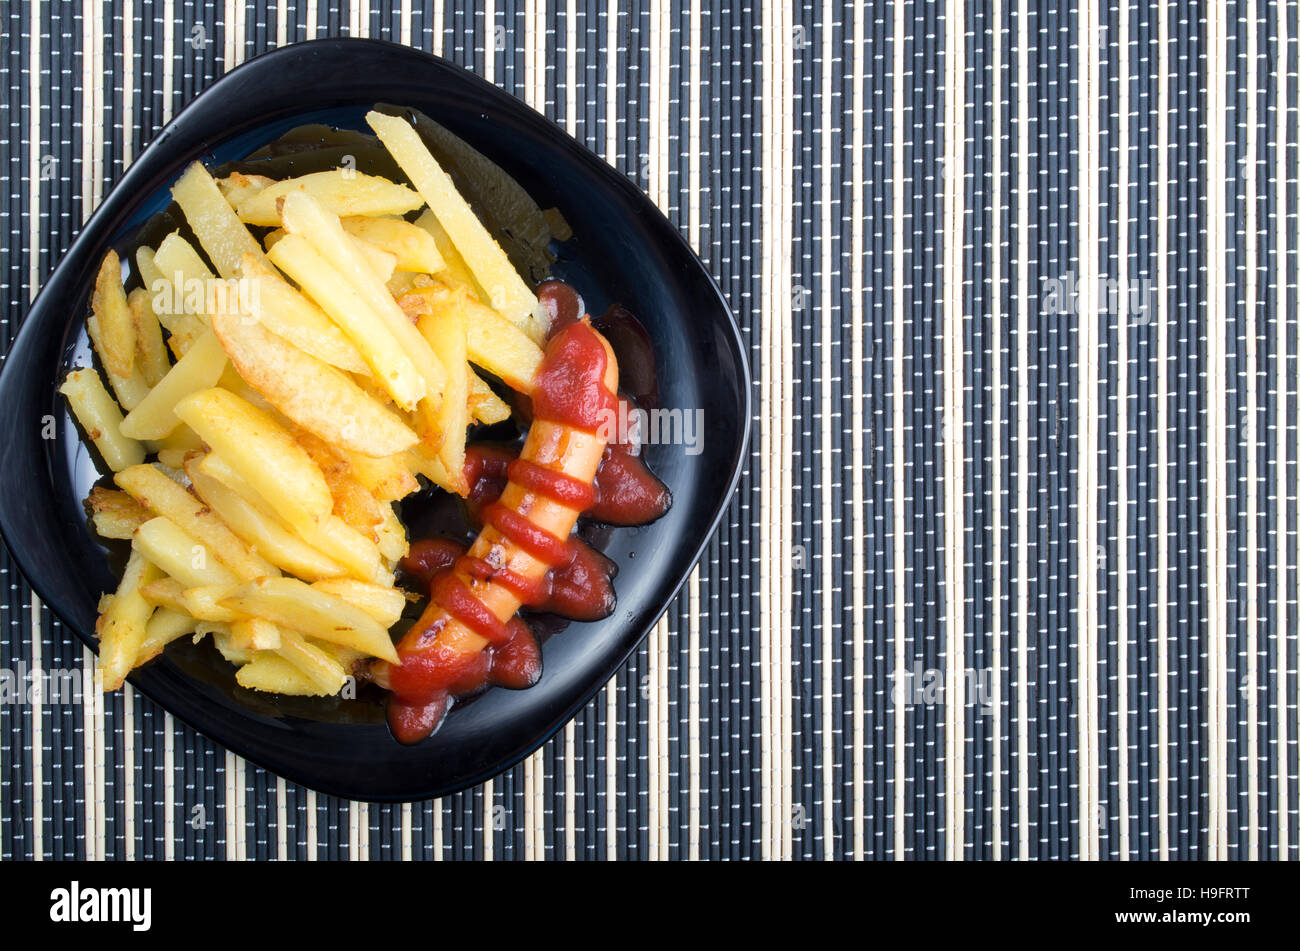 Top view of the Russian national dish - fried sausage with tomato ketchup and a side dish of fried potatoes Stock Photo